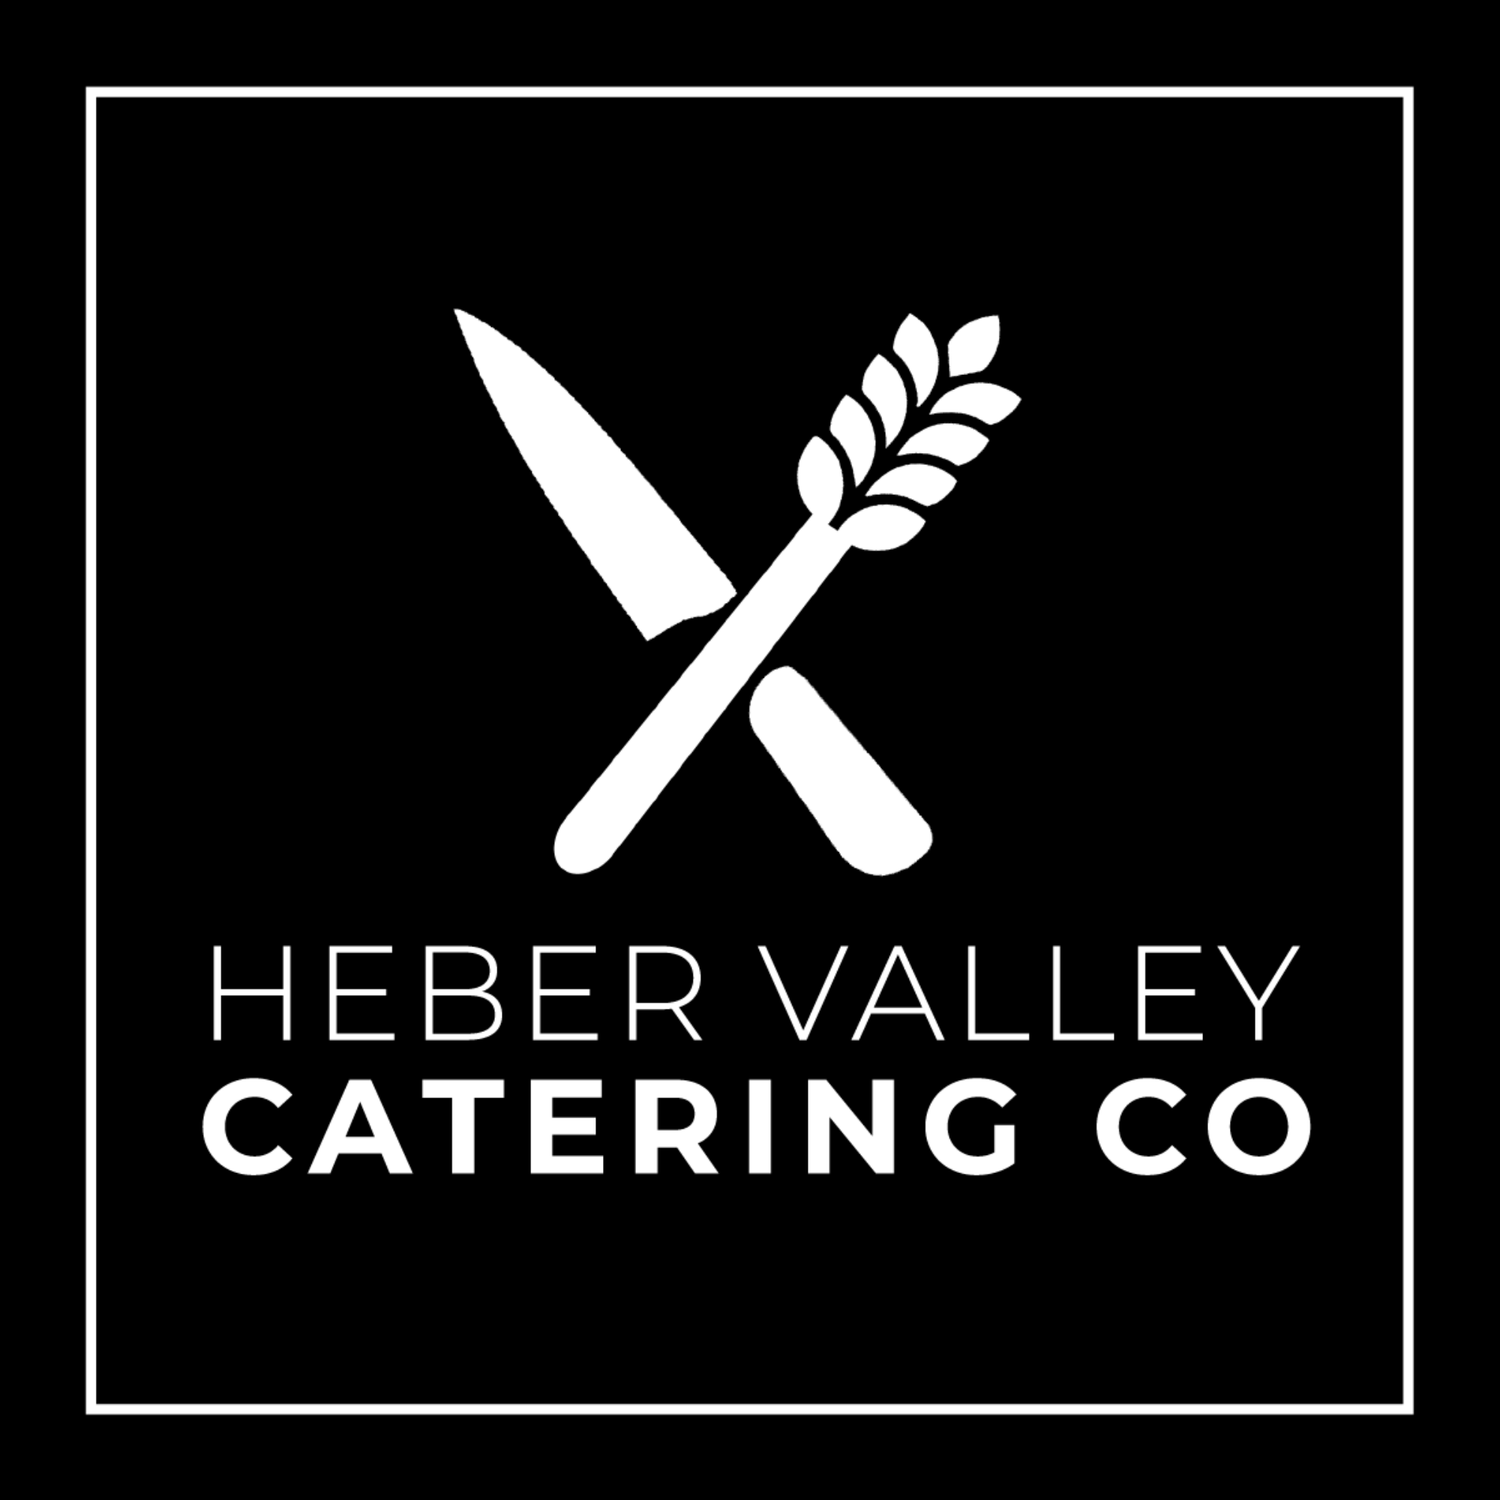 Heber Valley Catering Co.